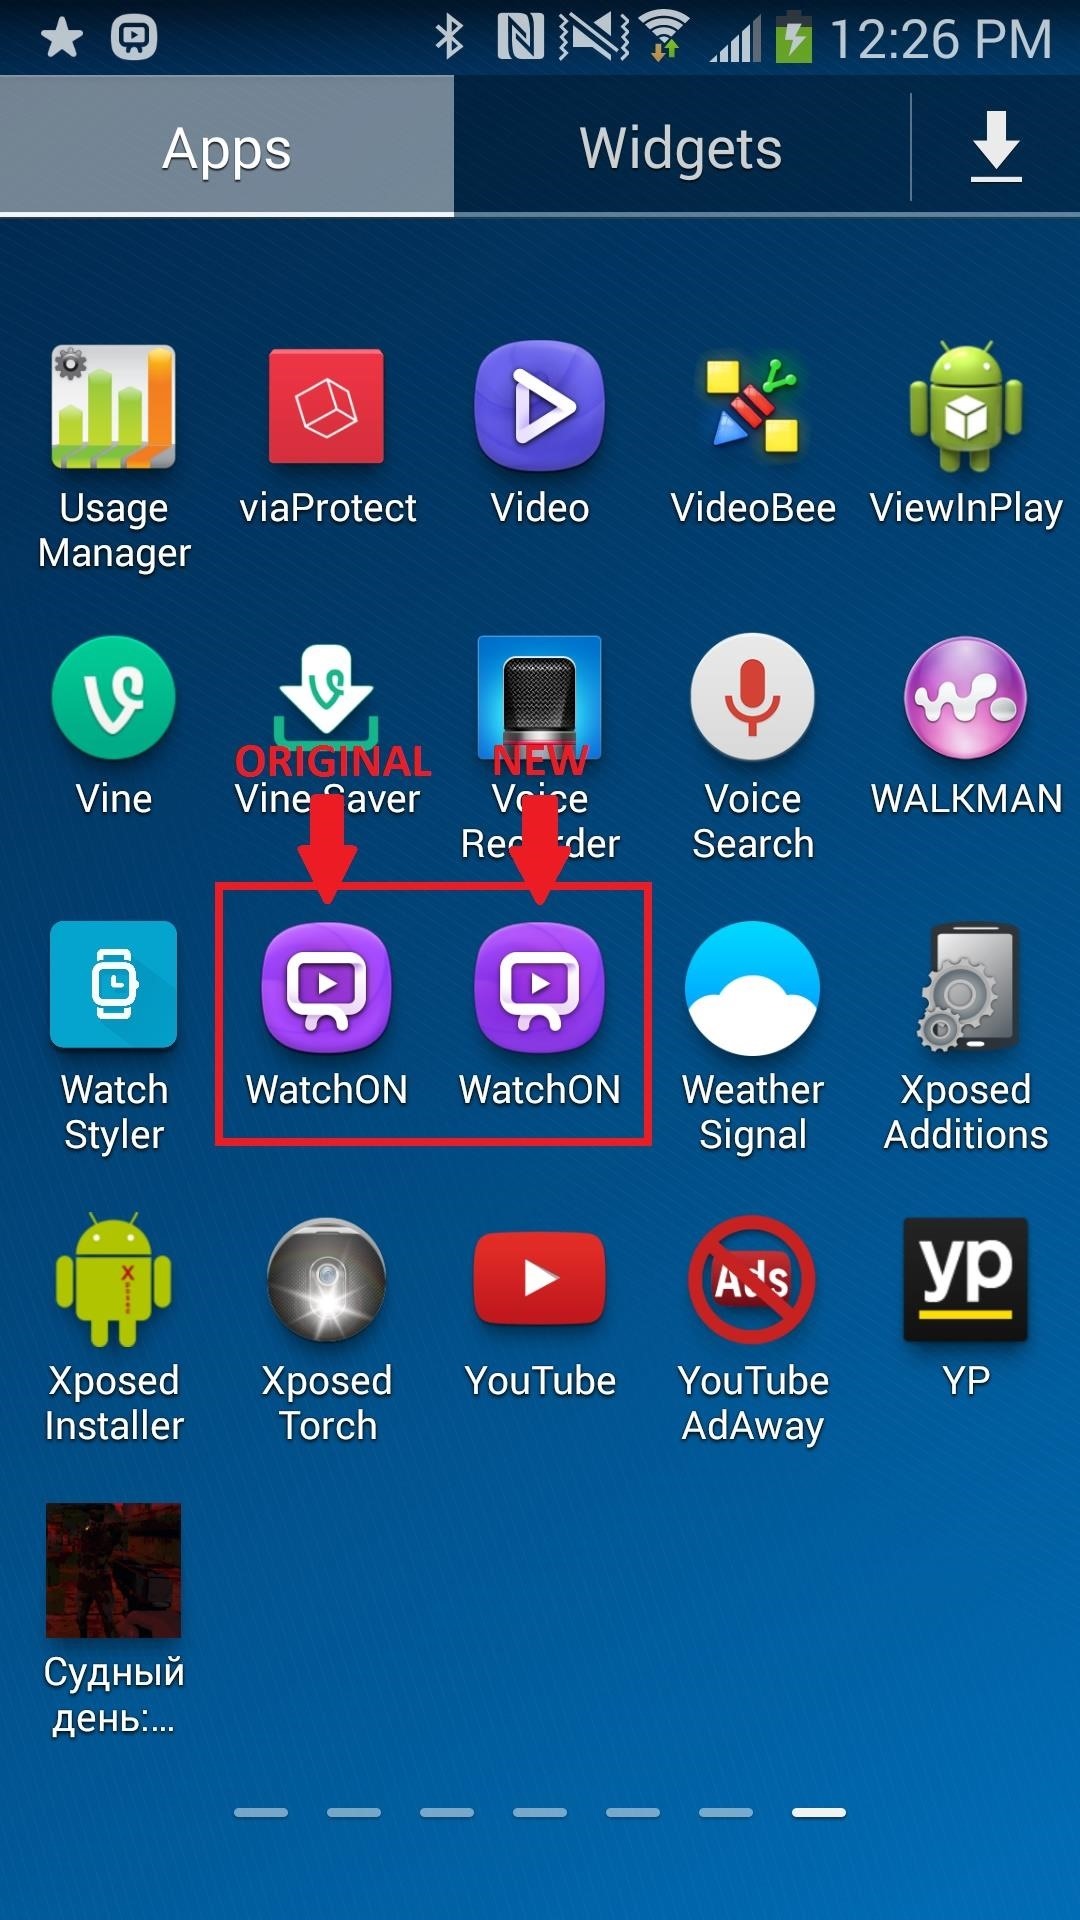 How to Get Samsung's New WatchON App from the Galaxy S5 on Your Galaxy Note 3